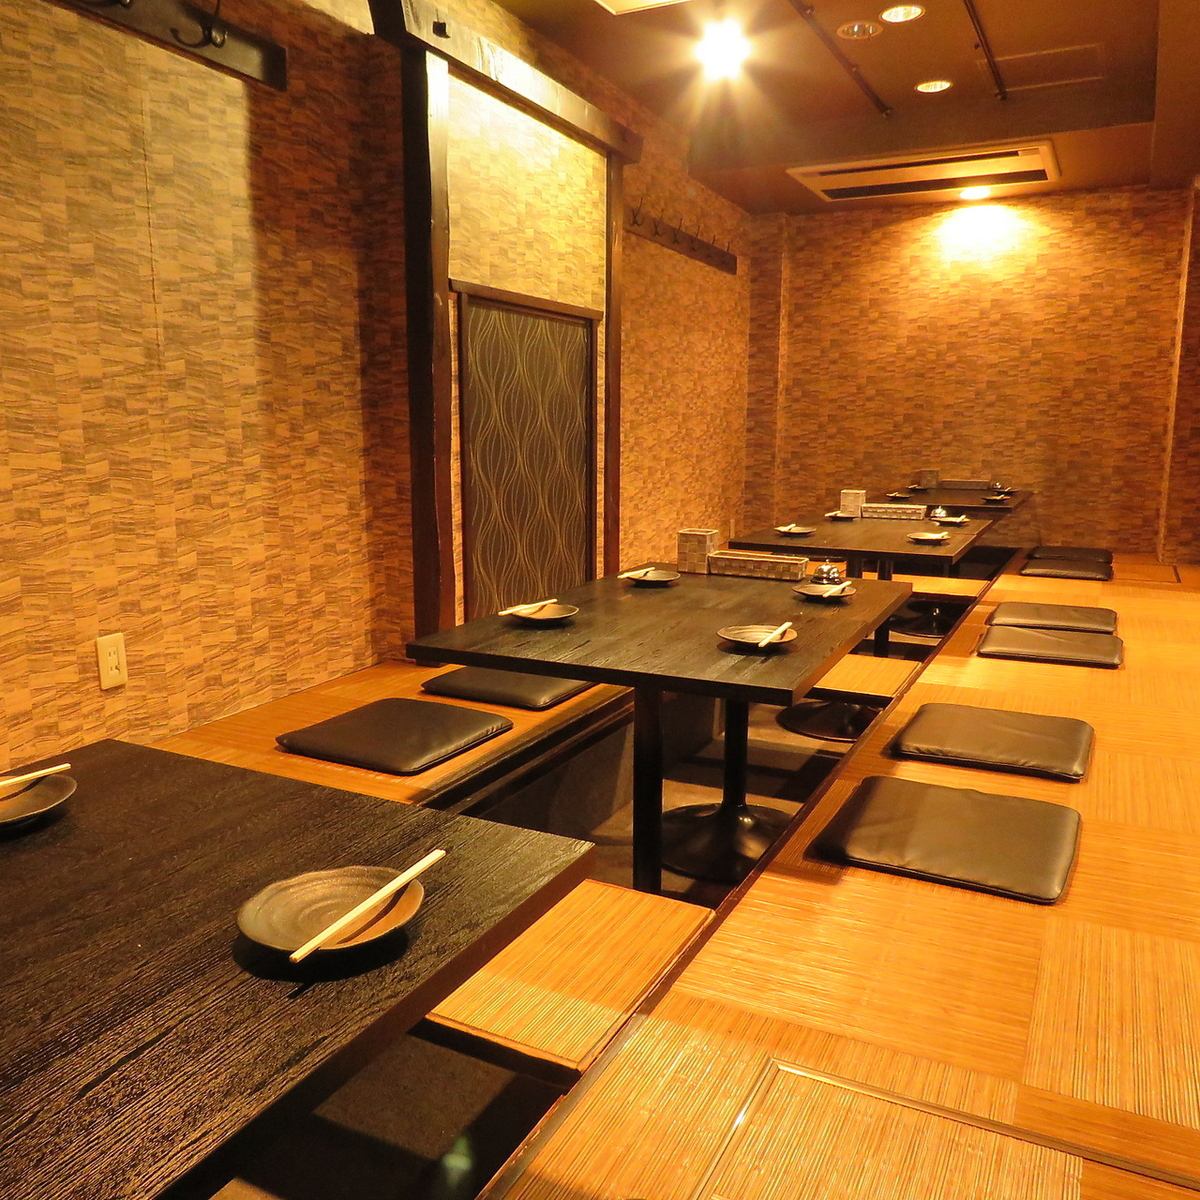 [Private room equipped] We have a private room with a sunken kotatsu style♪